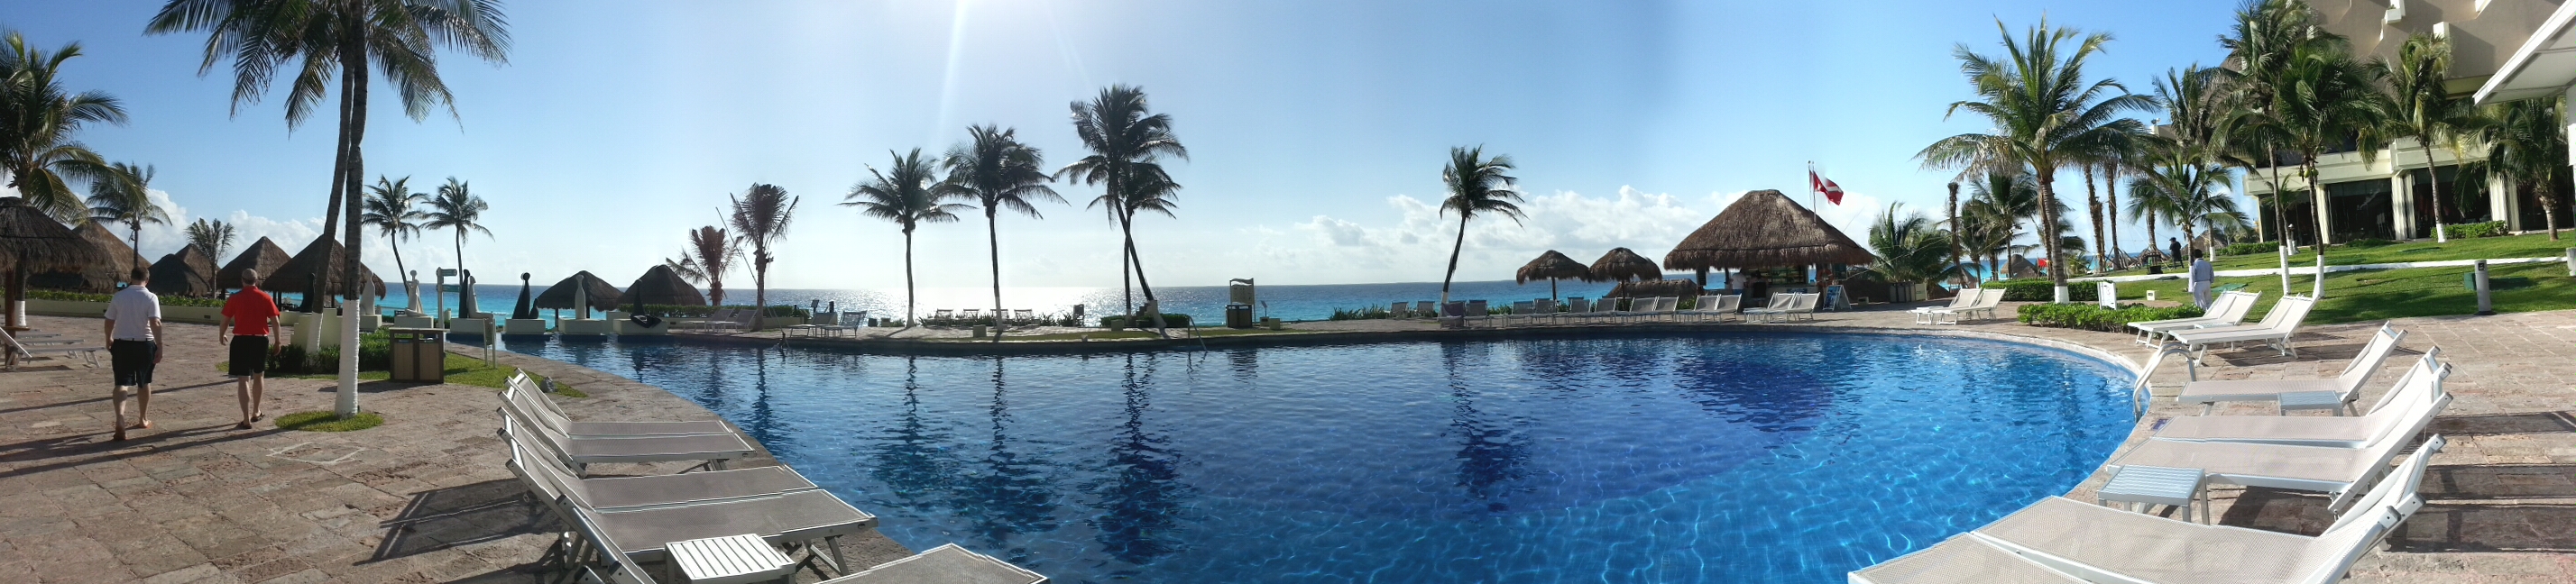 Panoramic view of cancun